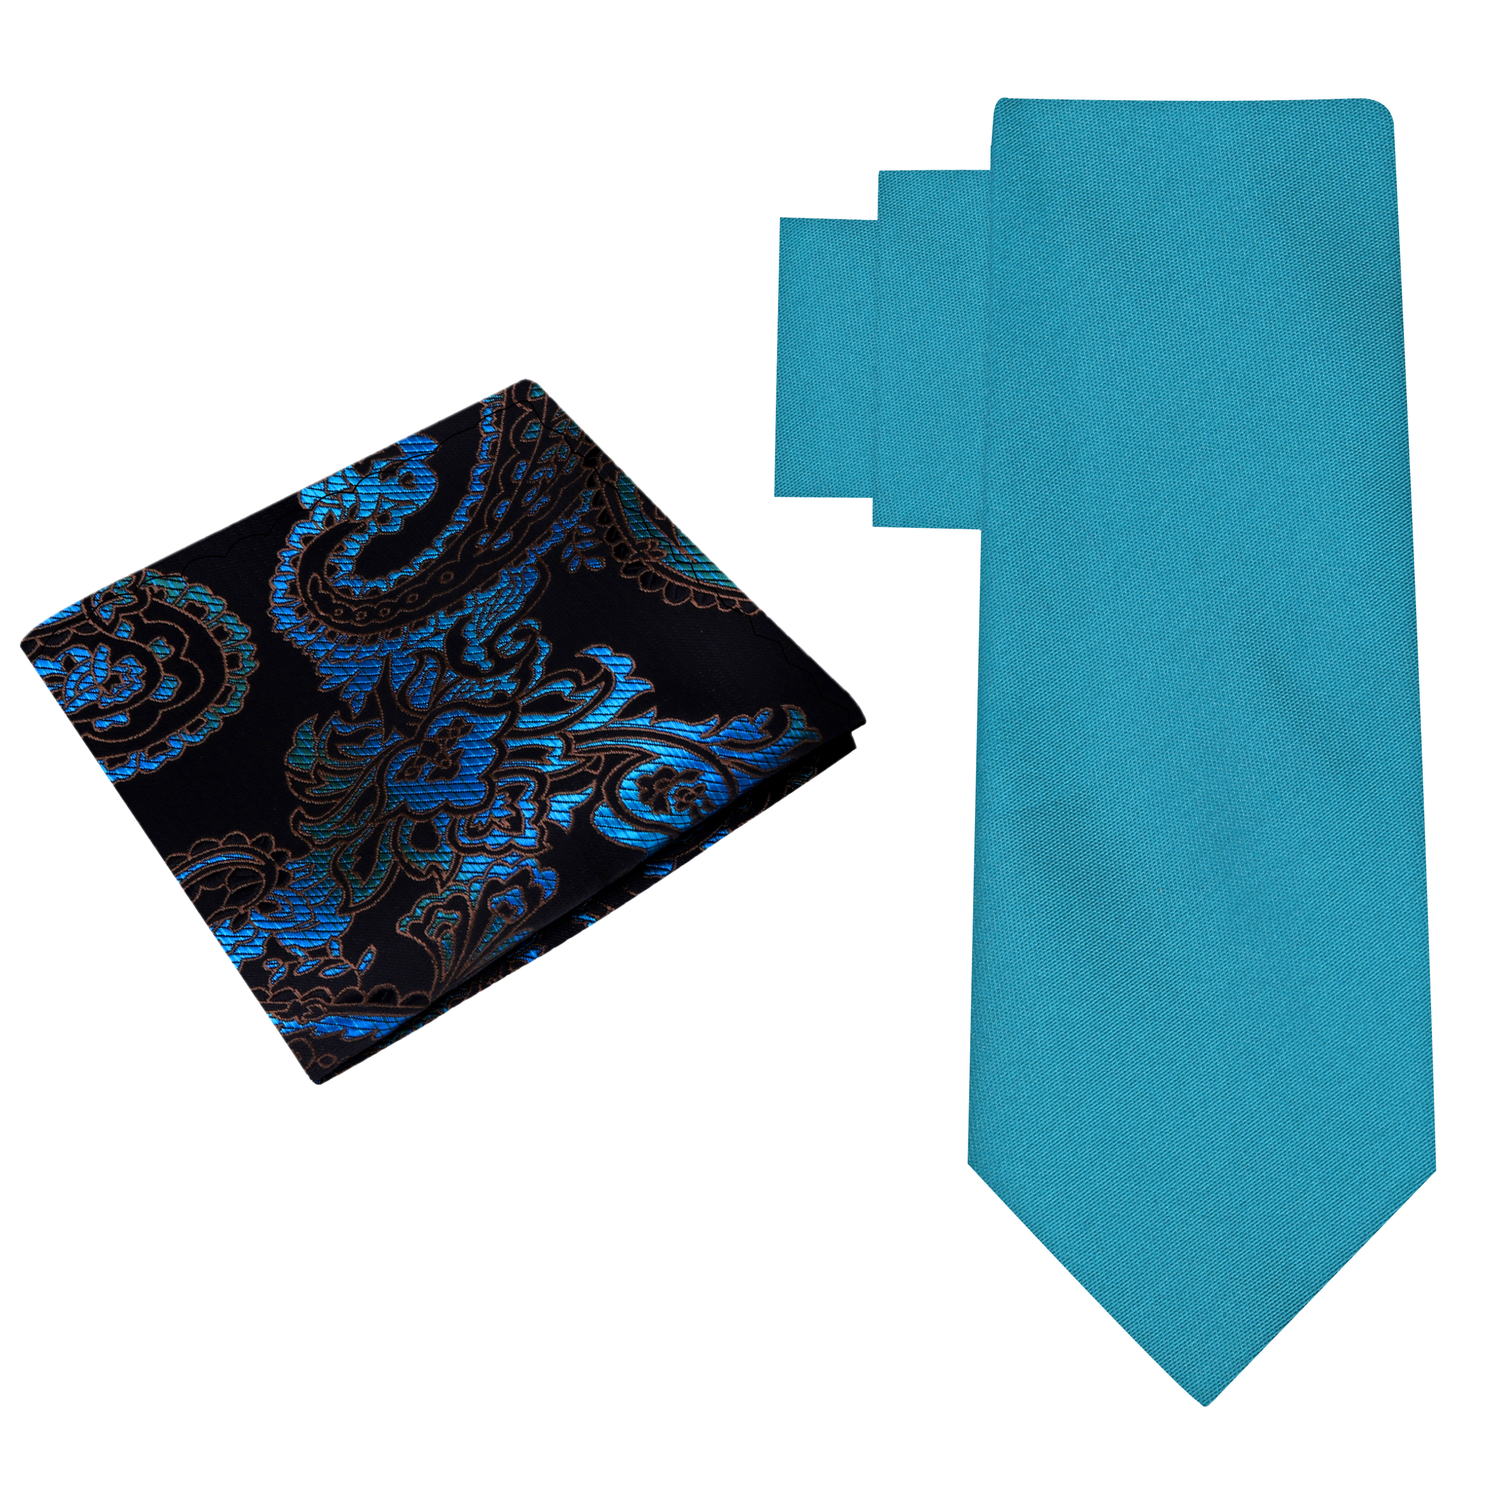 Alt View: Caribbean Blue Green Necktie with Black and Blue Green Paisley Pocket Square